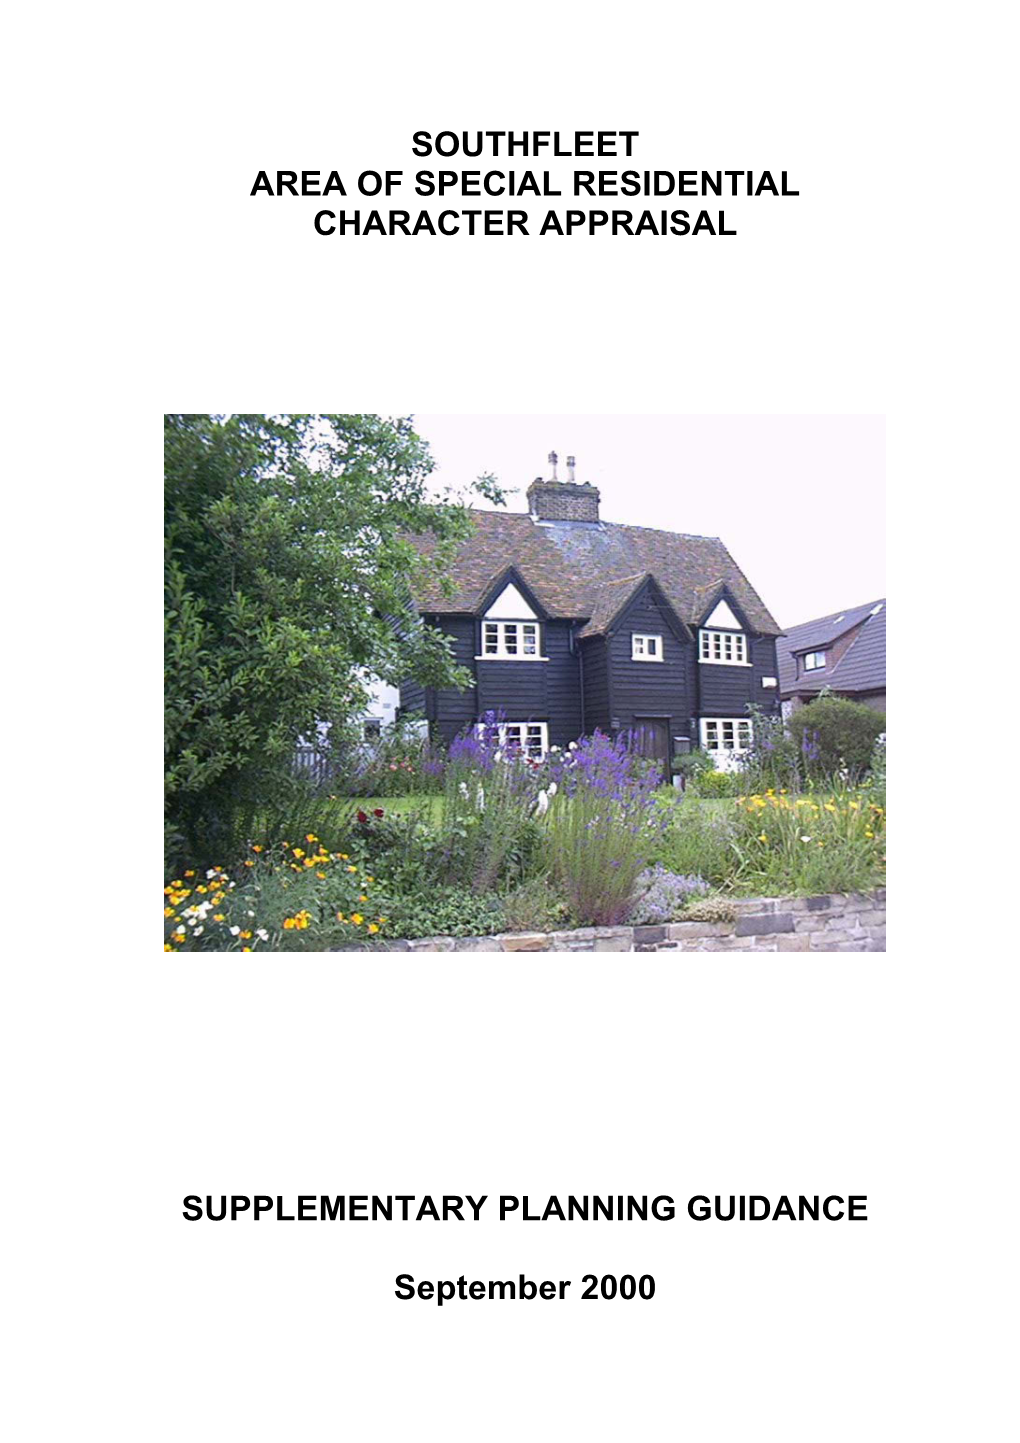 Southfleet Area of Special Residential Character Appraisal